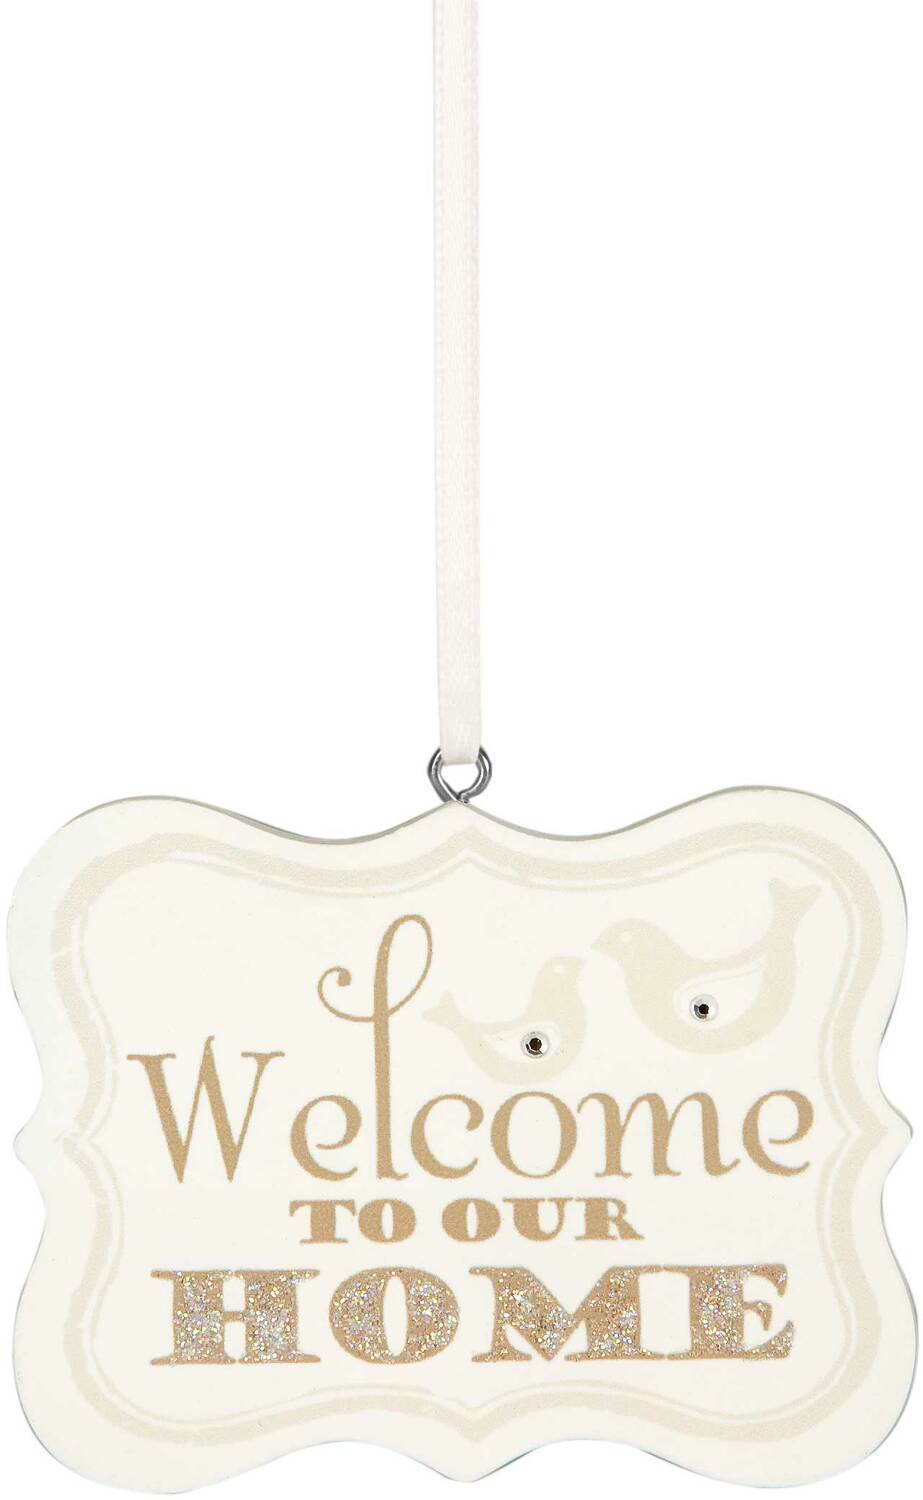 Welcome to our Home by Signs of Happiness - Welcome to our Home - 2.75" x 2.25" Hanging Plaque